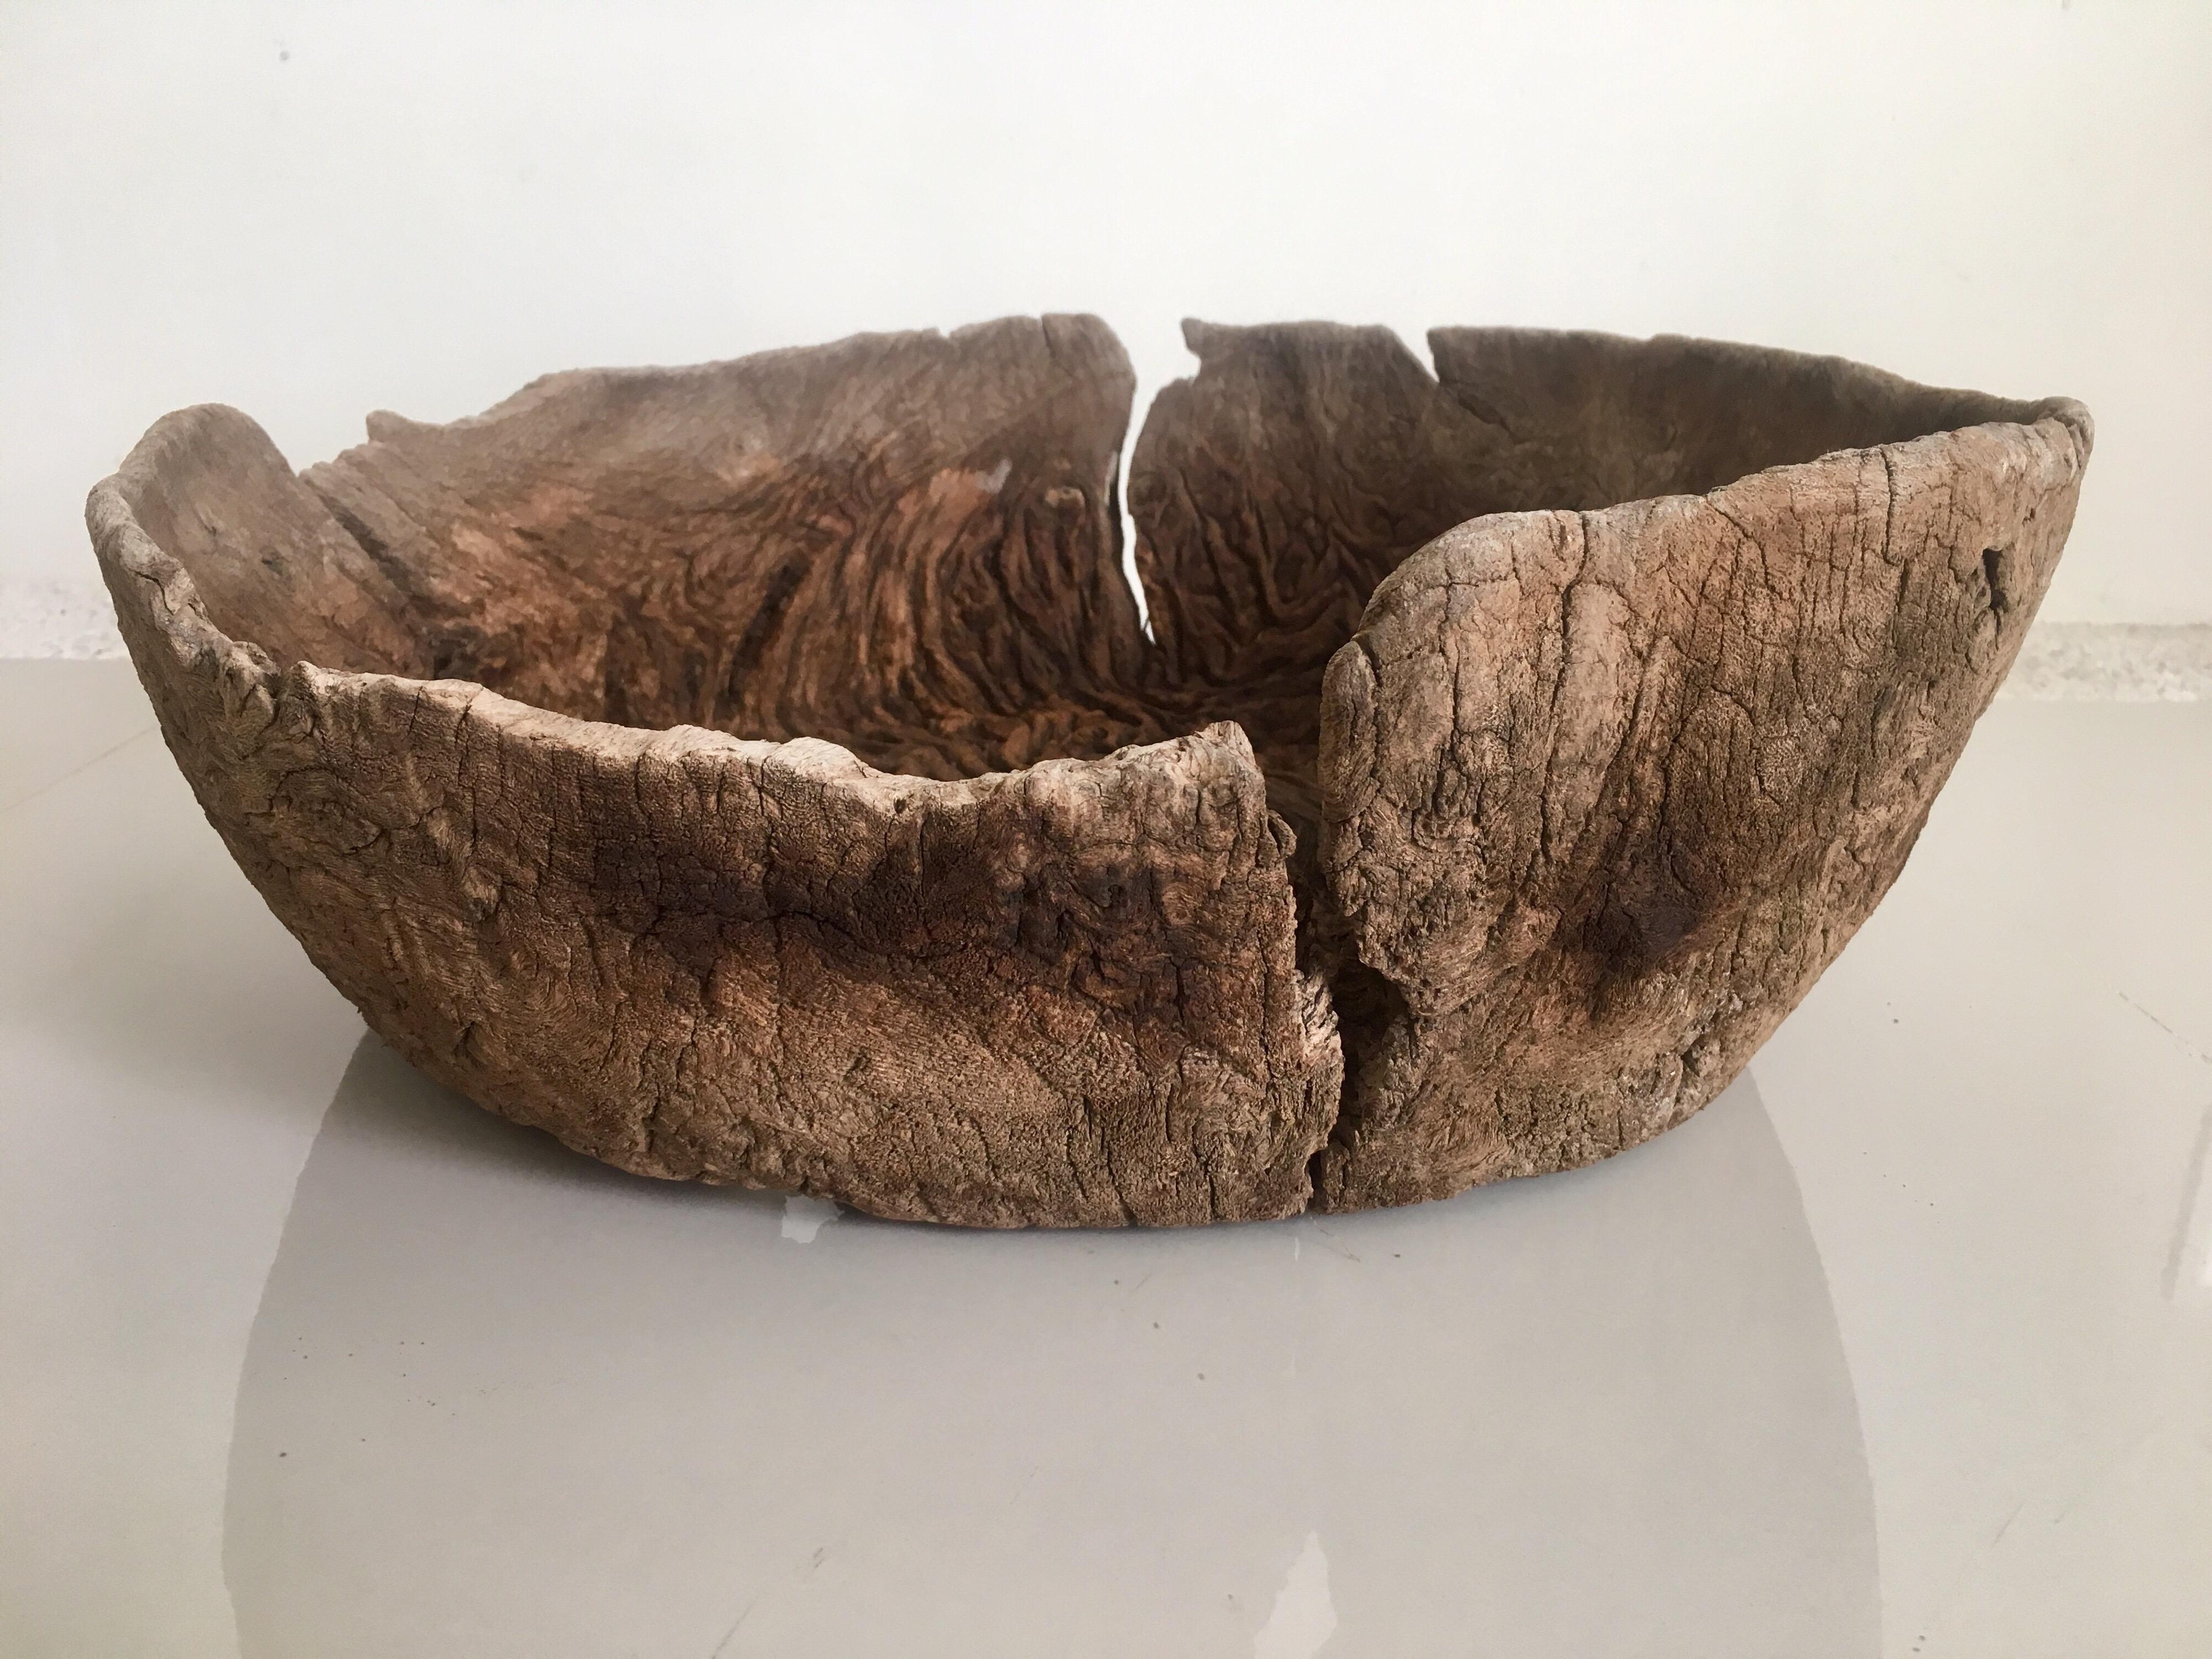 Antique mesquite wood bowl from Guanajuato region of Mexico showing unusual wear and age. The piece was located in the vicinity of Xichú which is a town that is part of the Sierra Gorda biosphere.